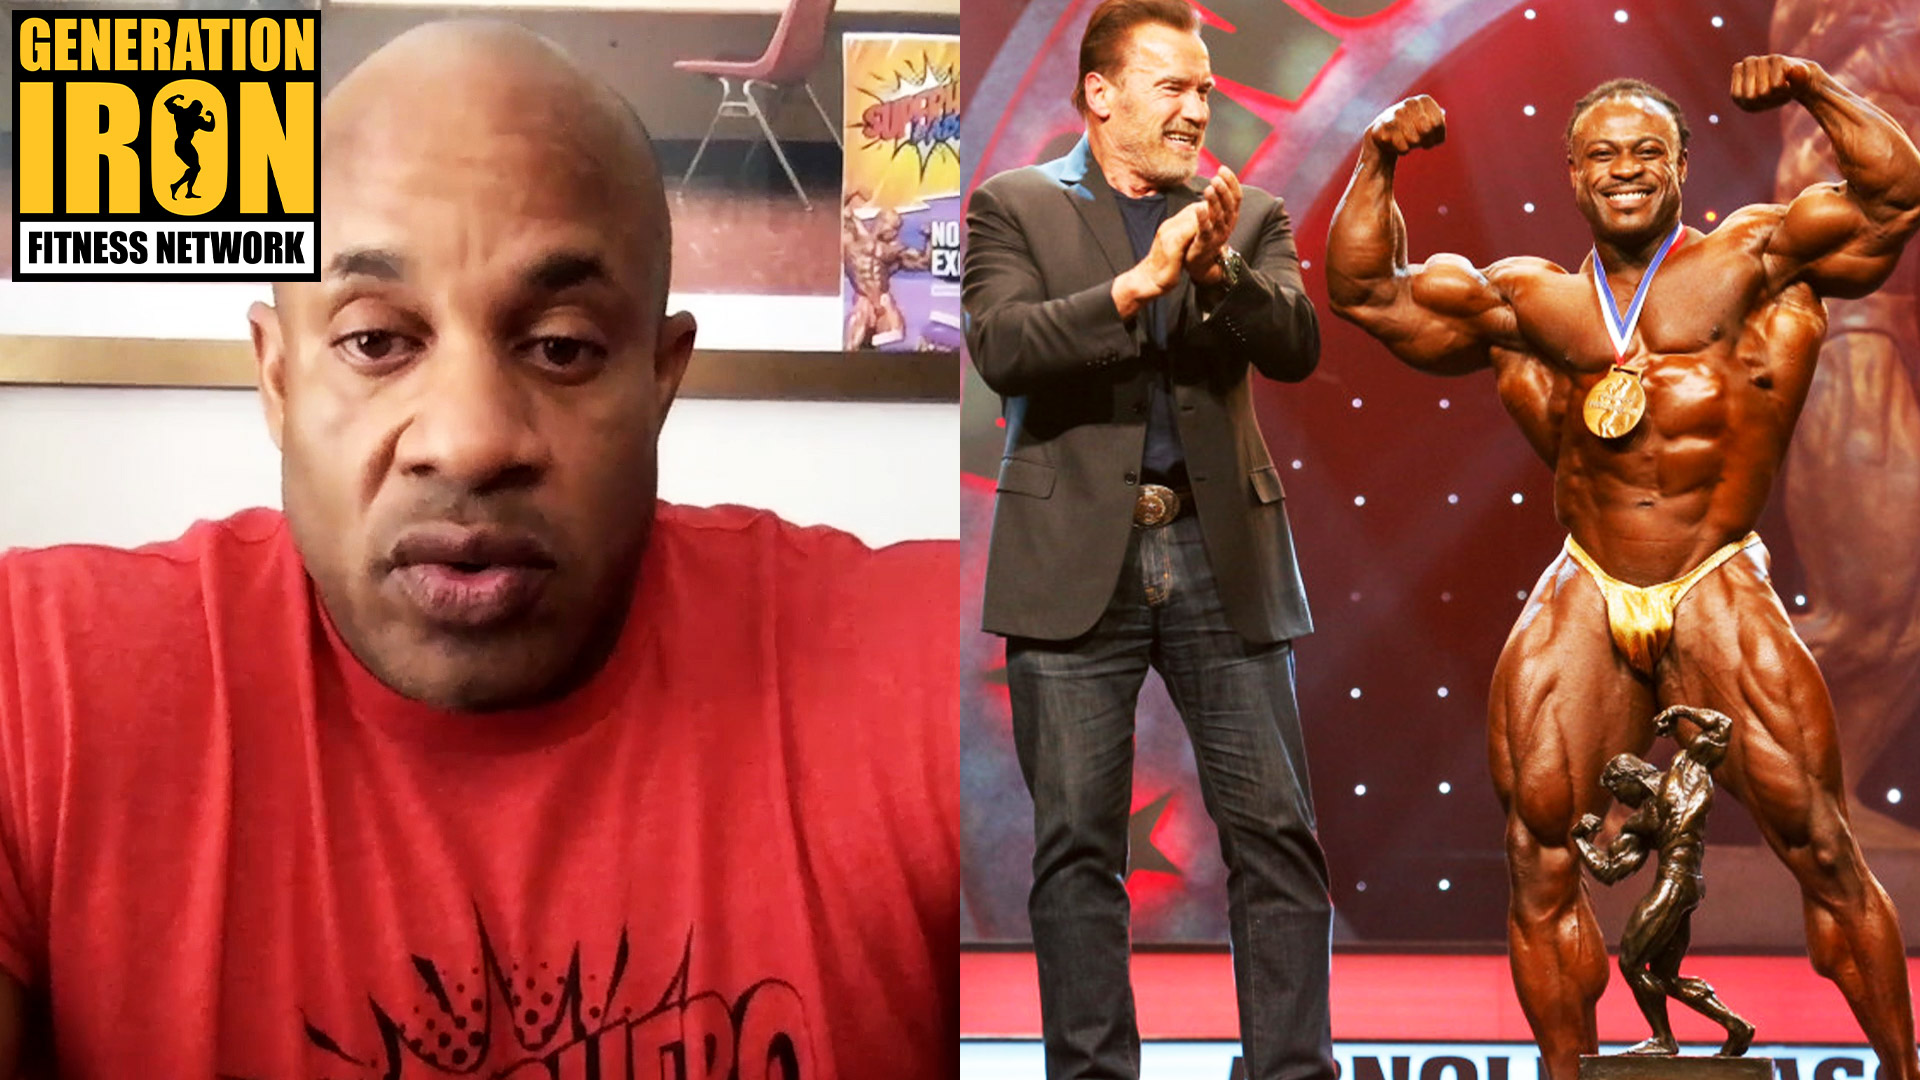 Victor-Martinez-Arnold-Classic-2021-Predictions-YT-CLEAN.jpg